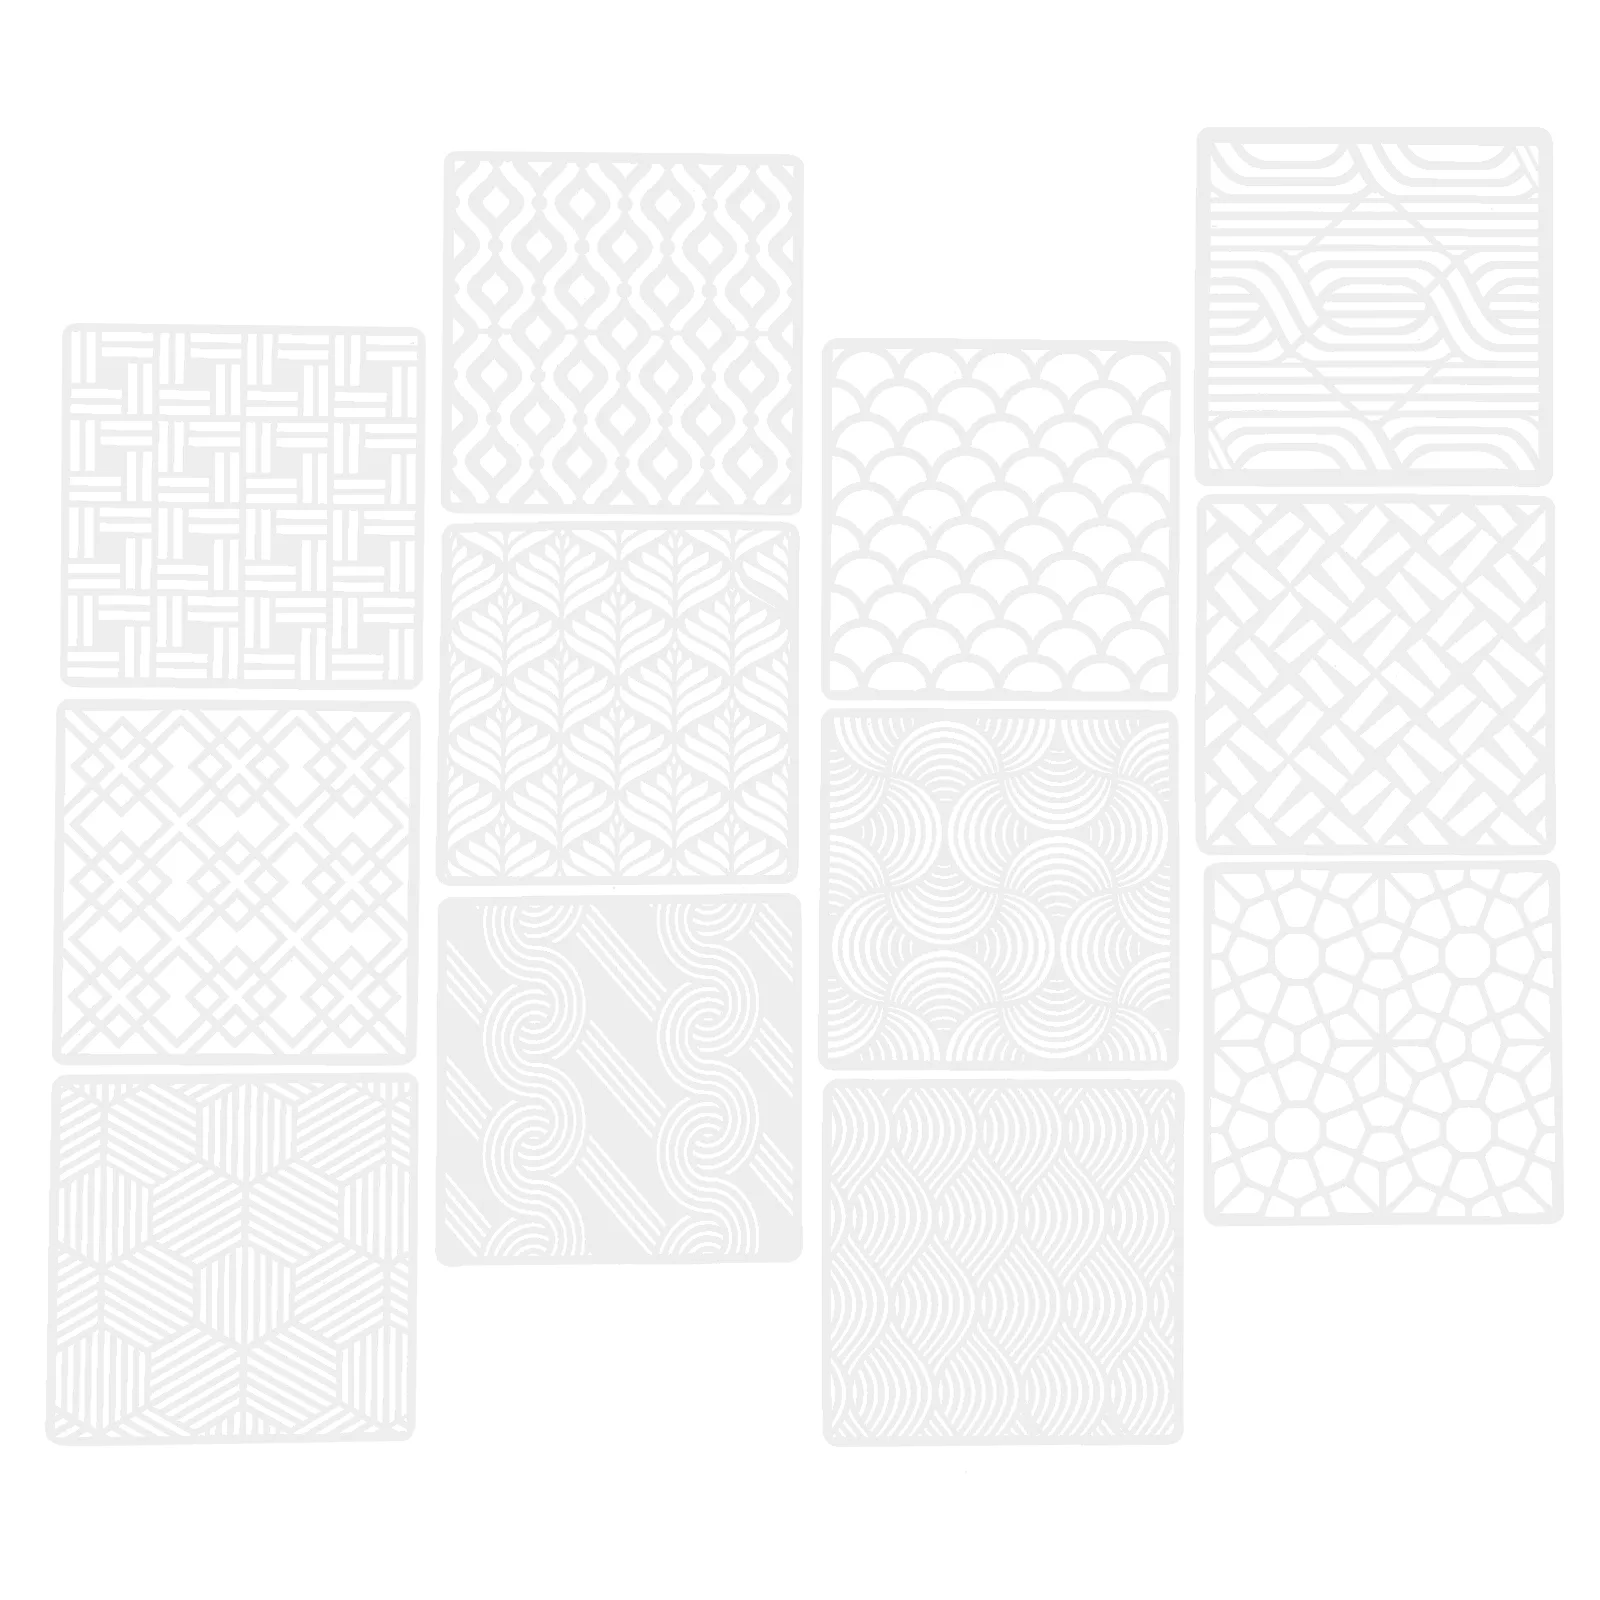 

12 Pcs Geometric Drawing Template Wall Decorating Stencil Floor Flower Decorations Painting DIY Plastic Child Tile